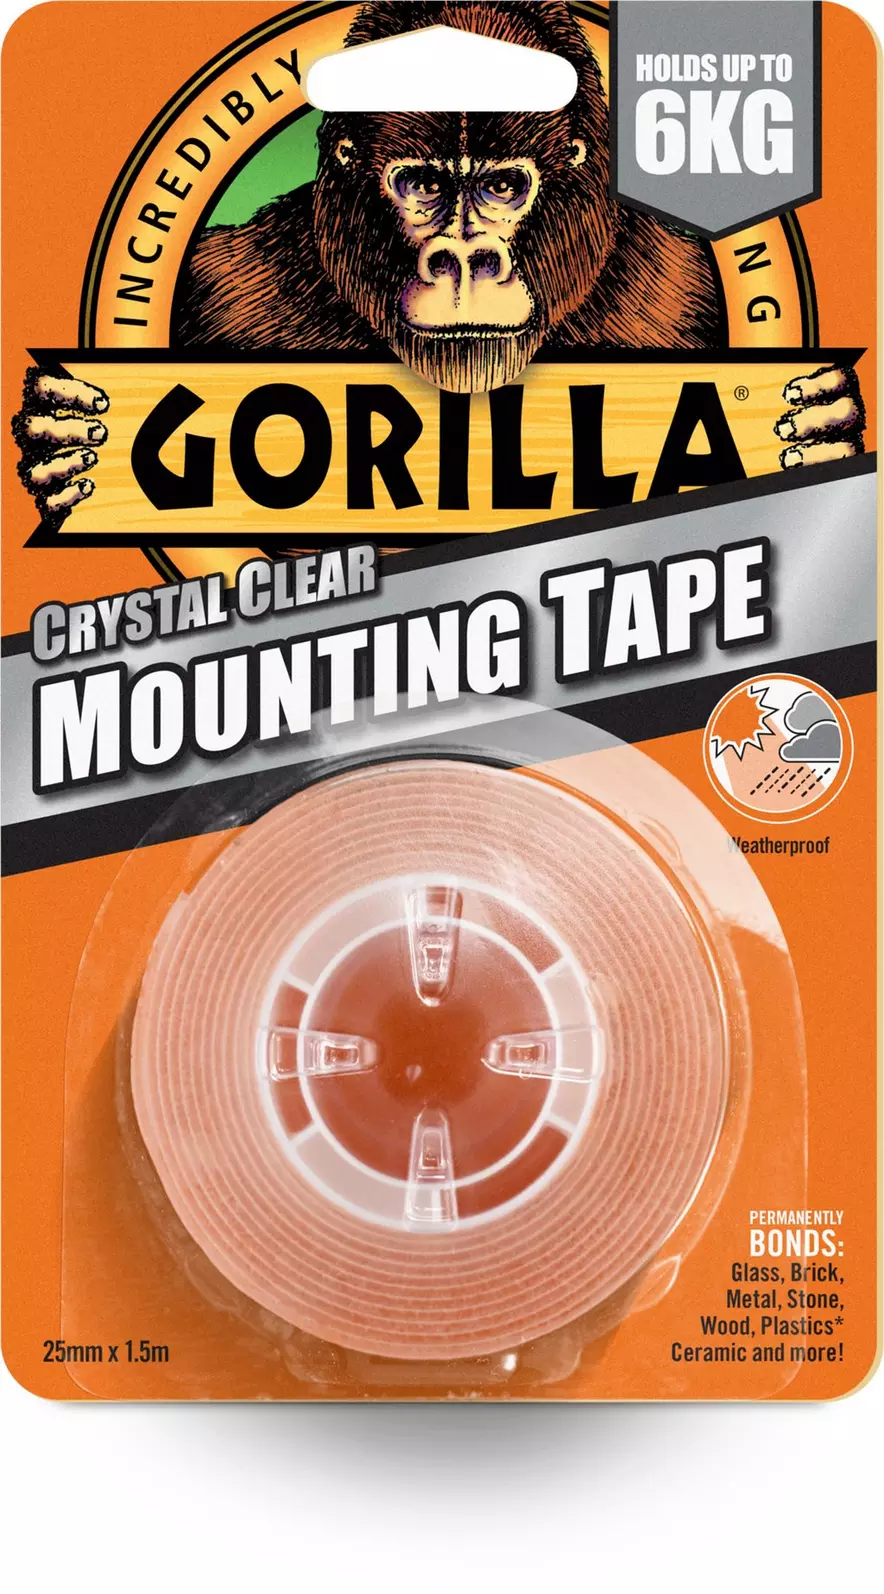 Gorilla Mounting Tape 25mm Double Sided 25mm x 1.52m